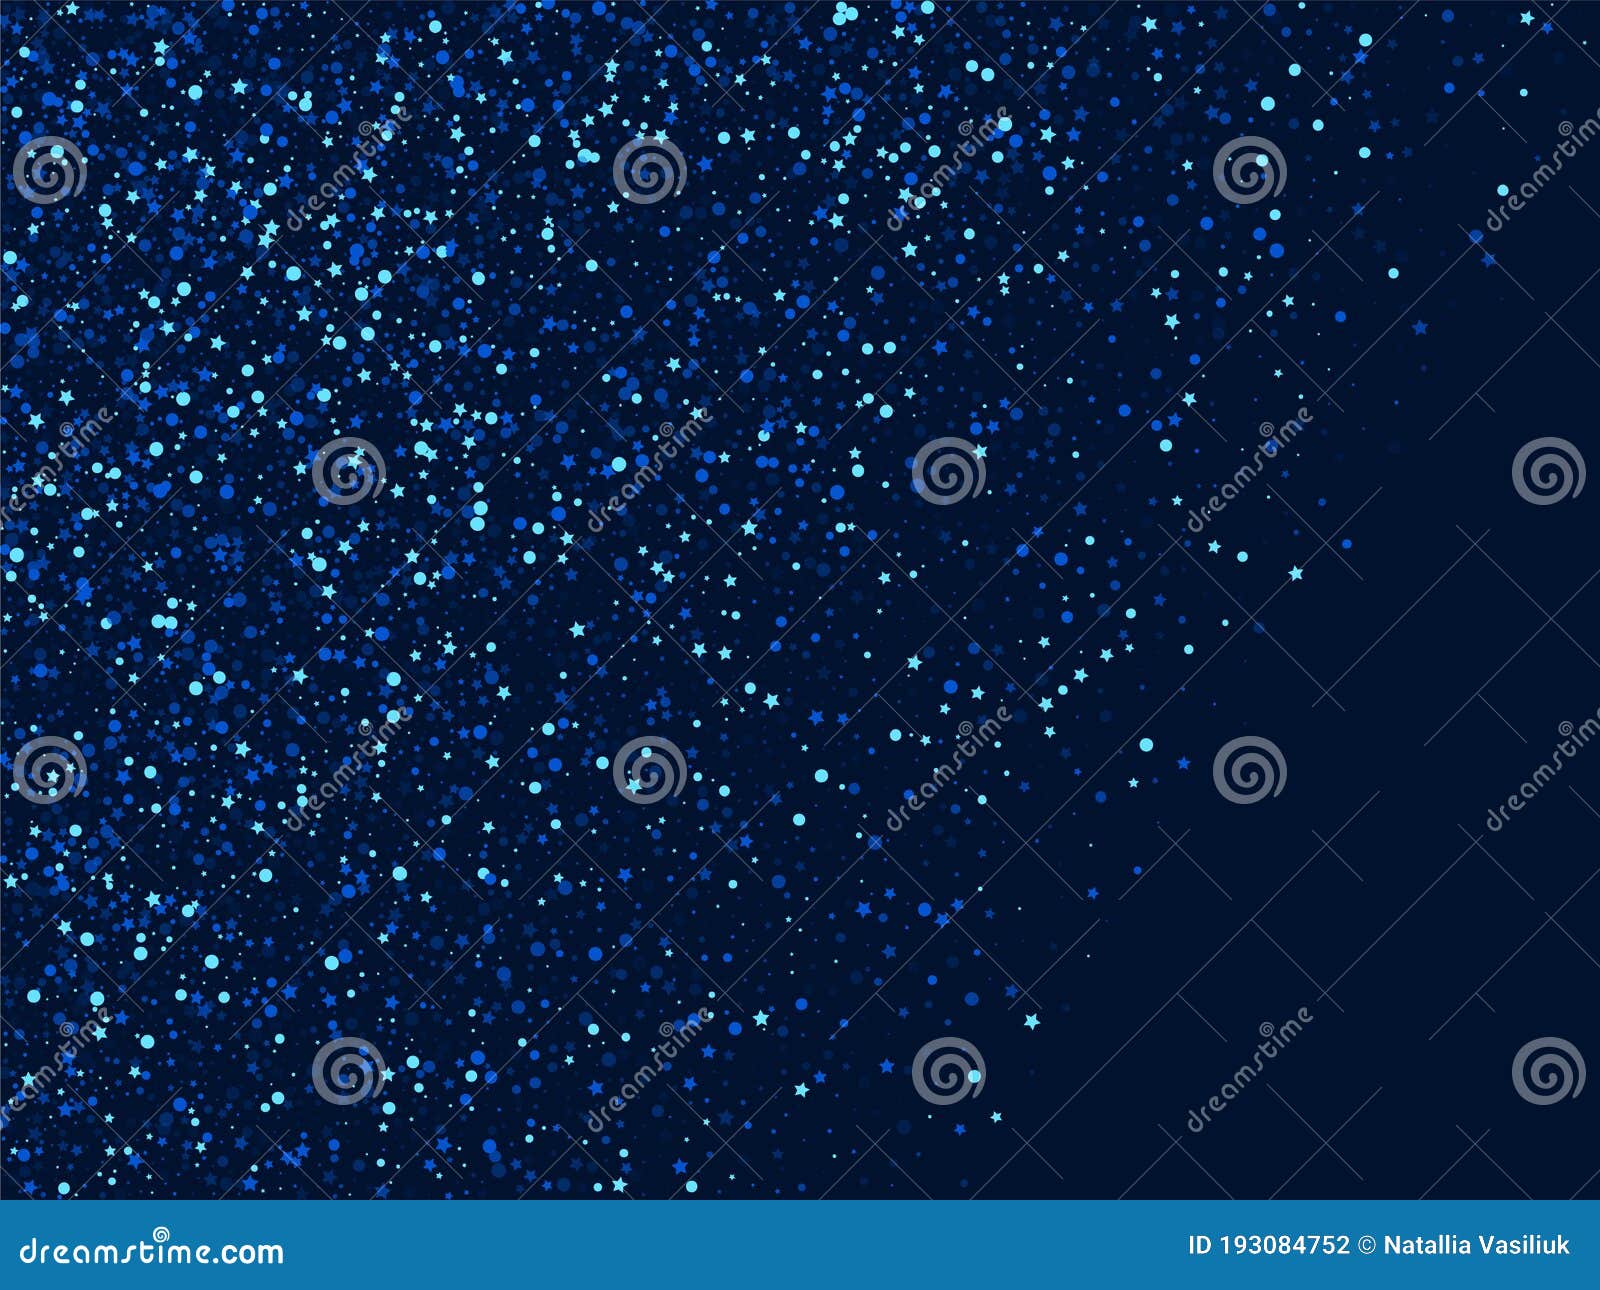 Silver Party Graphic Dust Wallpaper. White Galaxy Stock Vector ...